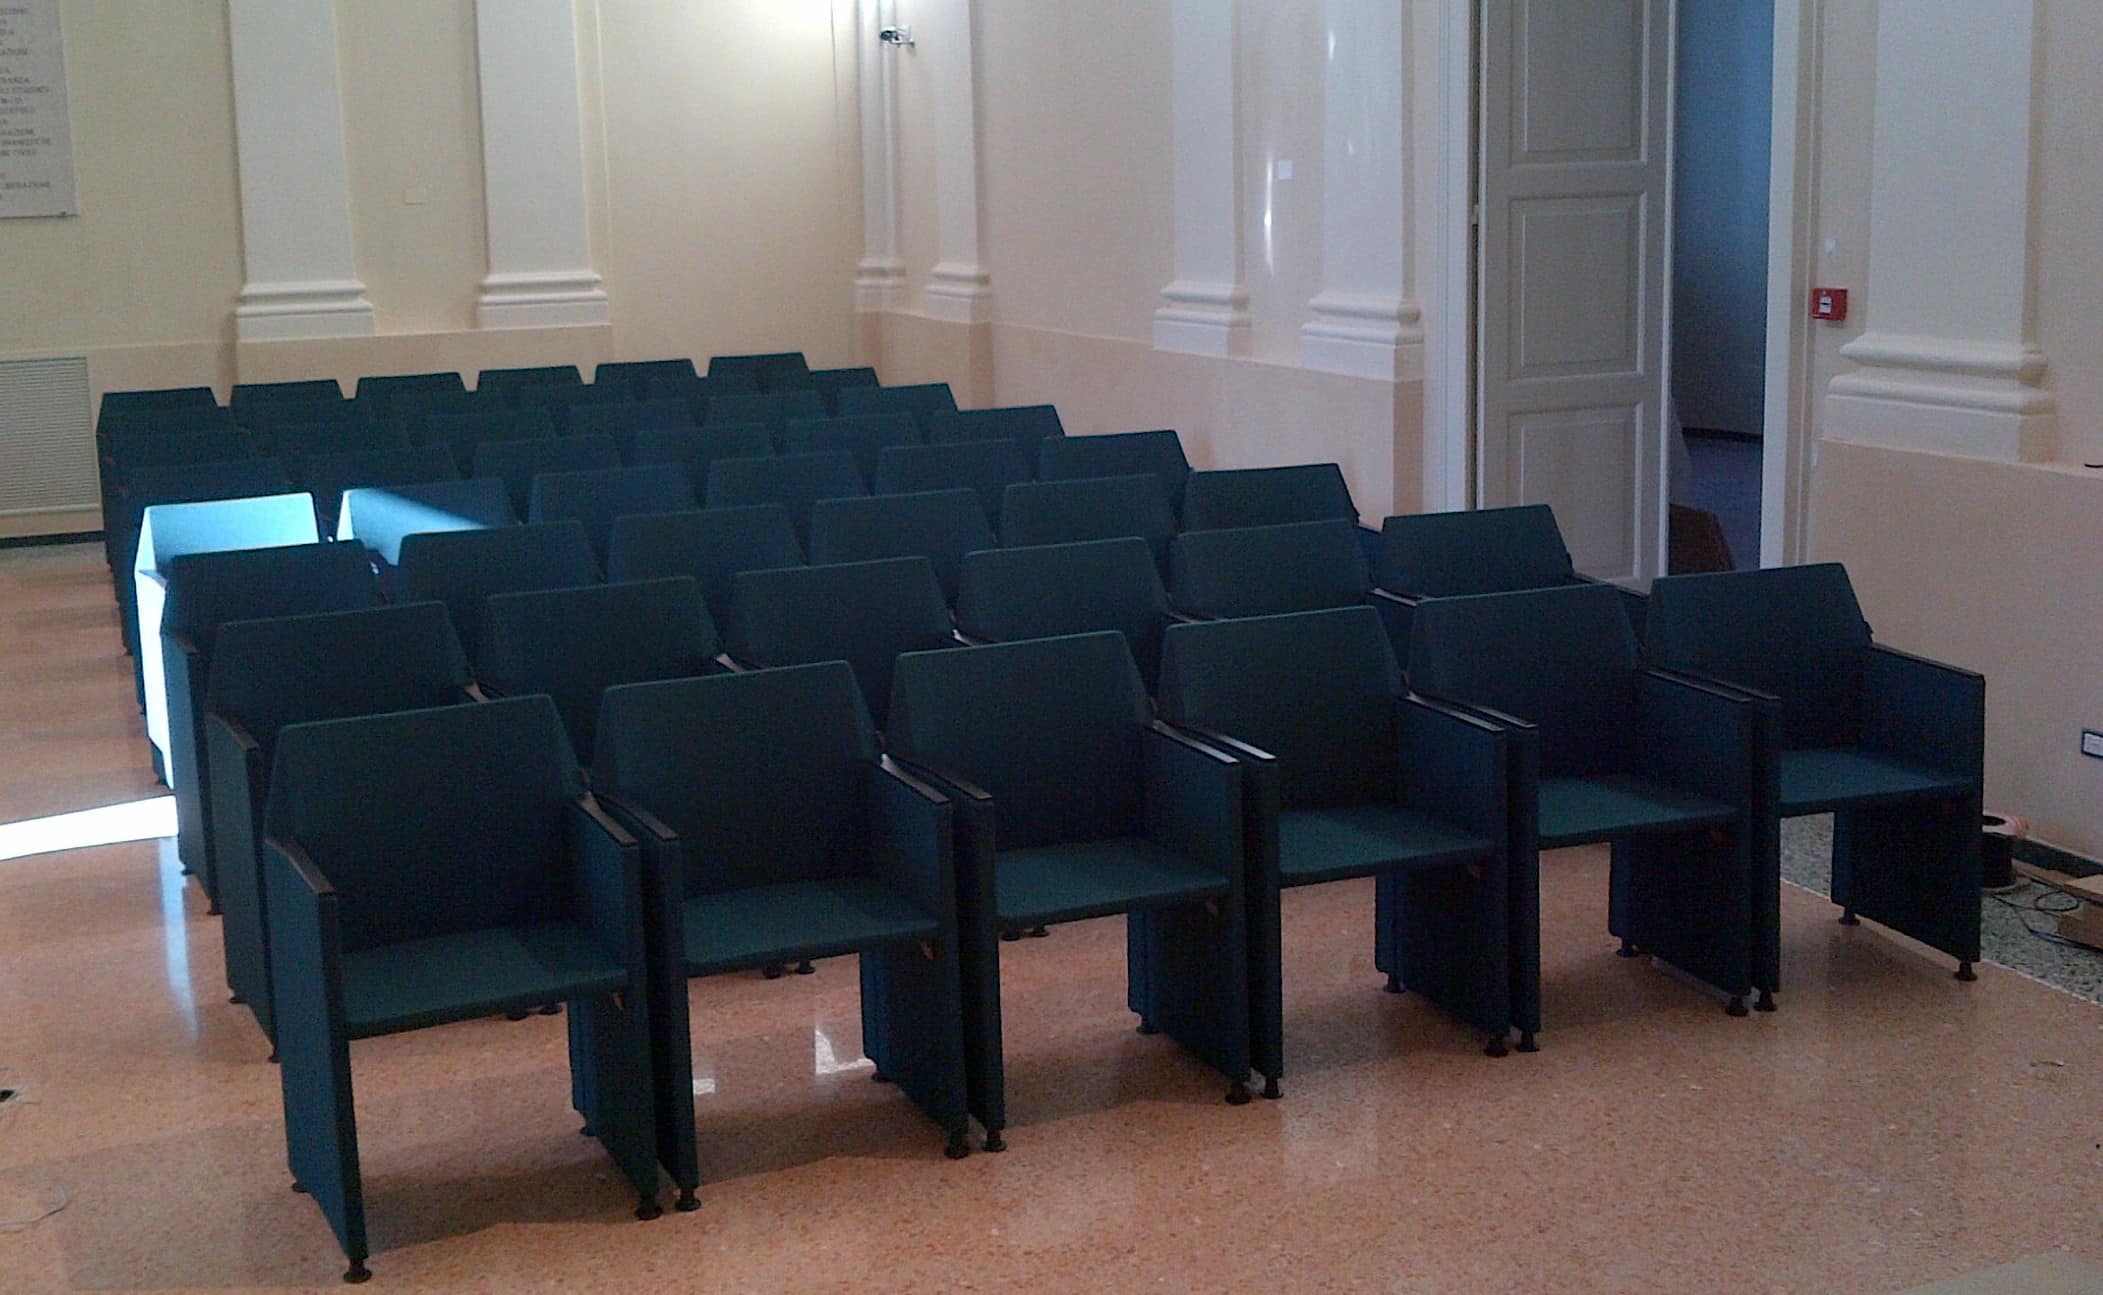 The conference room of the Municipality of Cesena